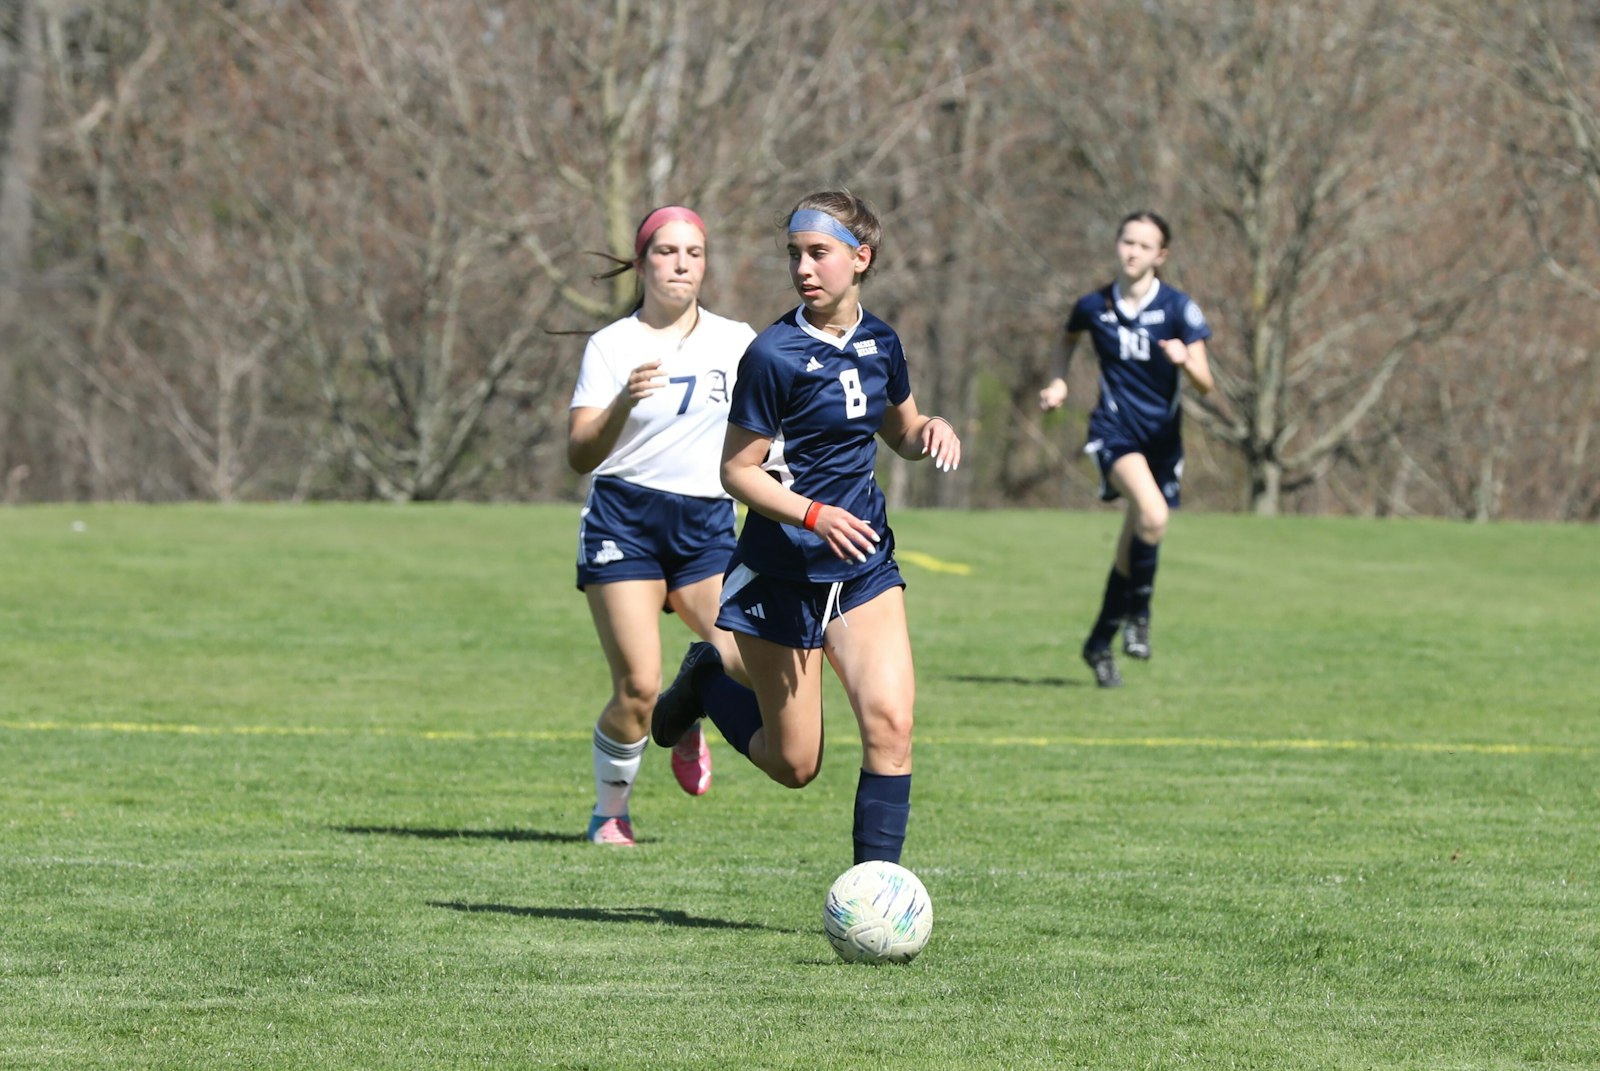 Freshman Elle Martin checks the defense while advancing the ball upfield during Bloomfield Hills’ Academy of the Sacred Heart’s 5-0 victory over Austin Catholic on April 16.